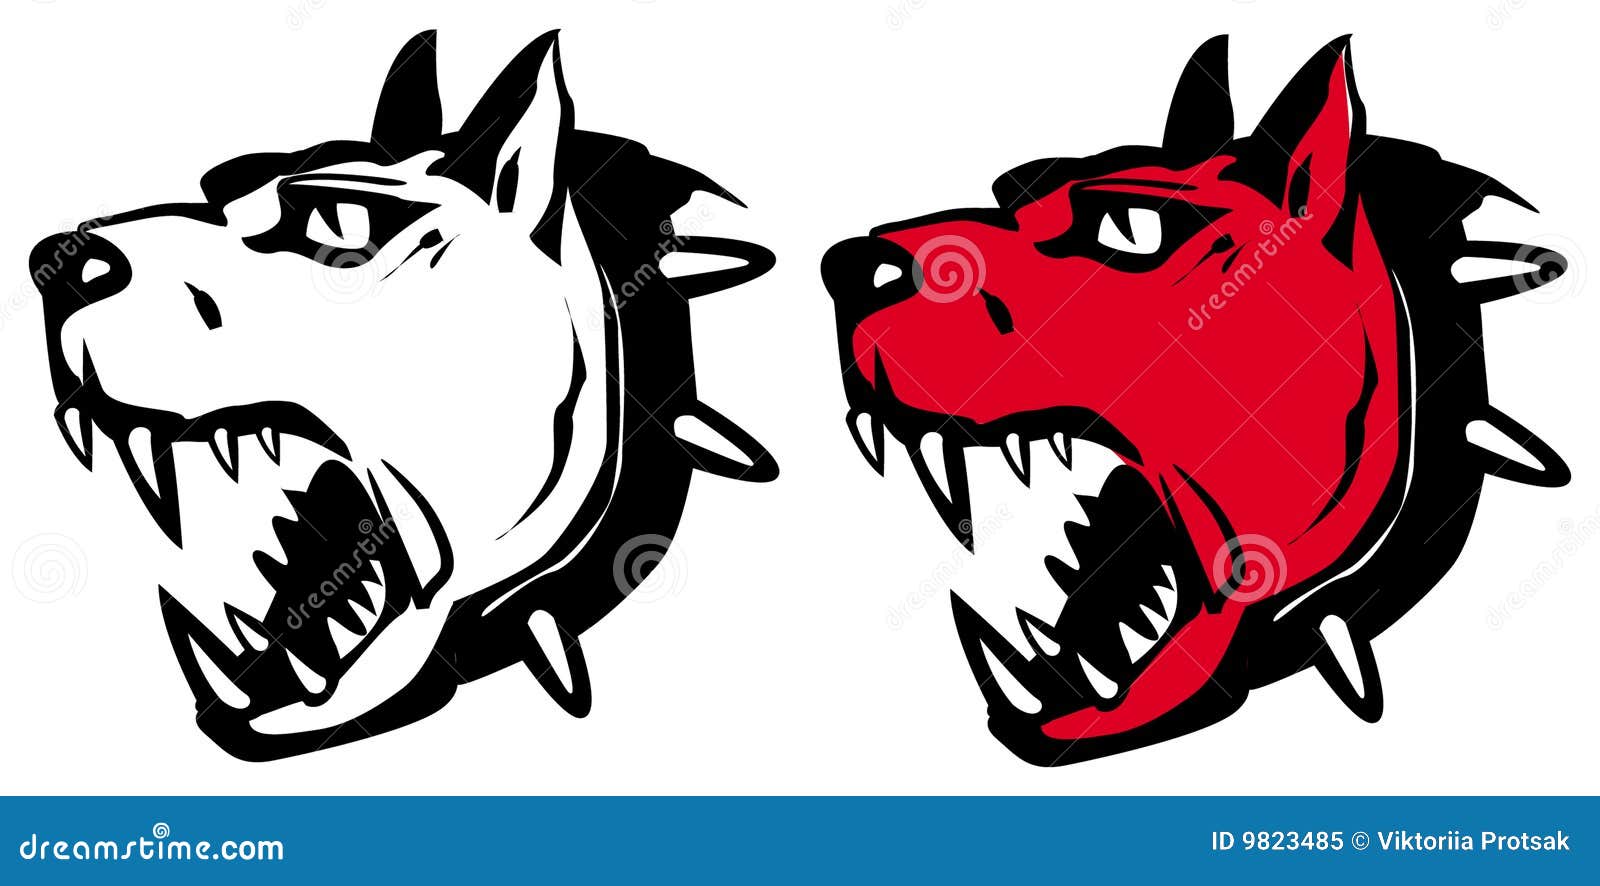 Angry dog stock vector. Illustration of graphic, collar